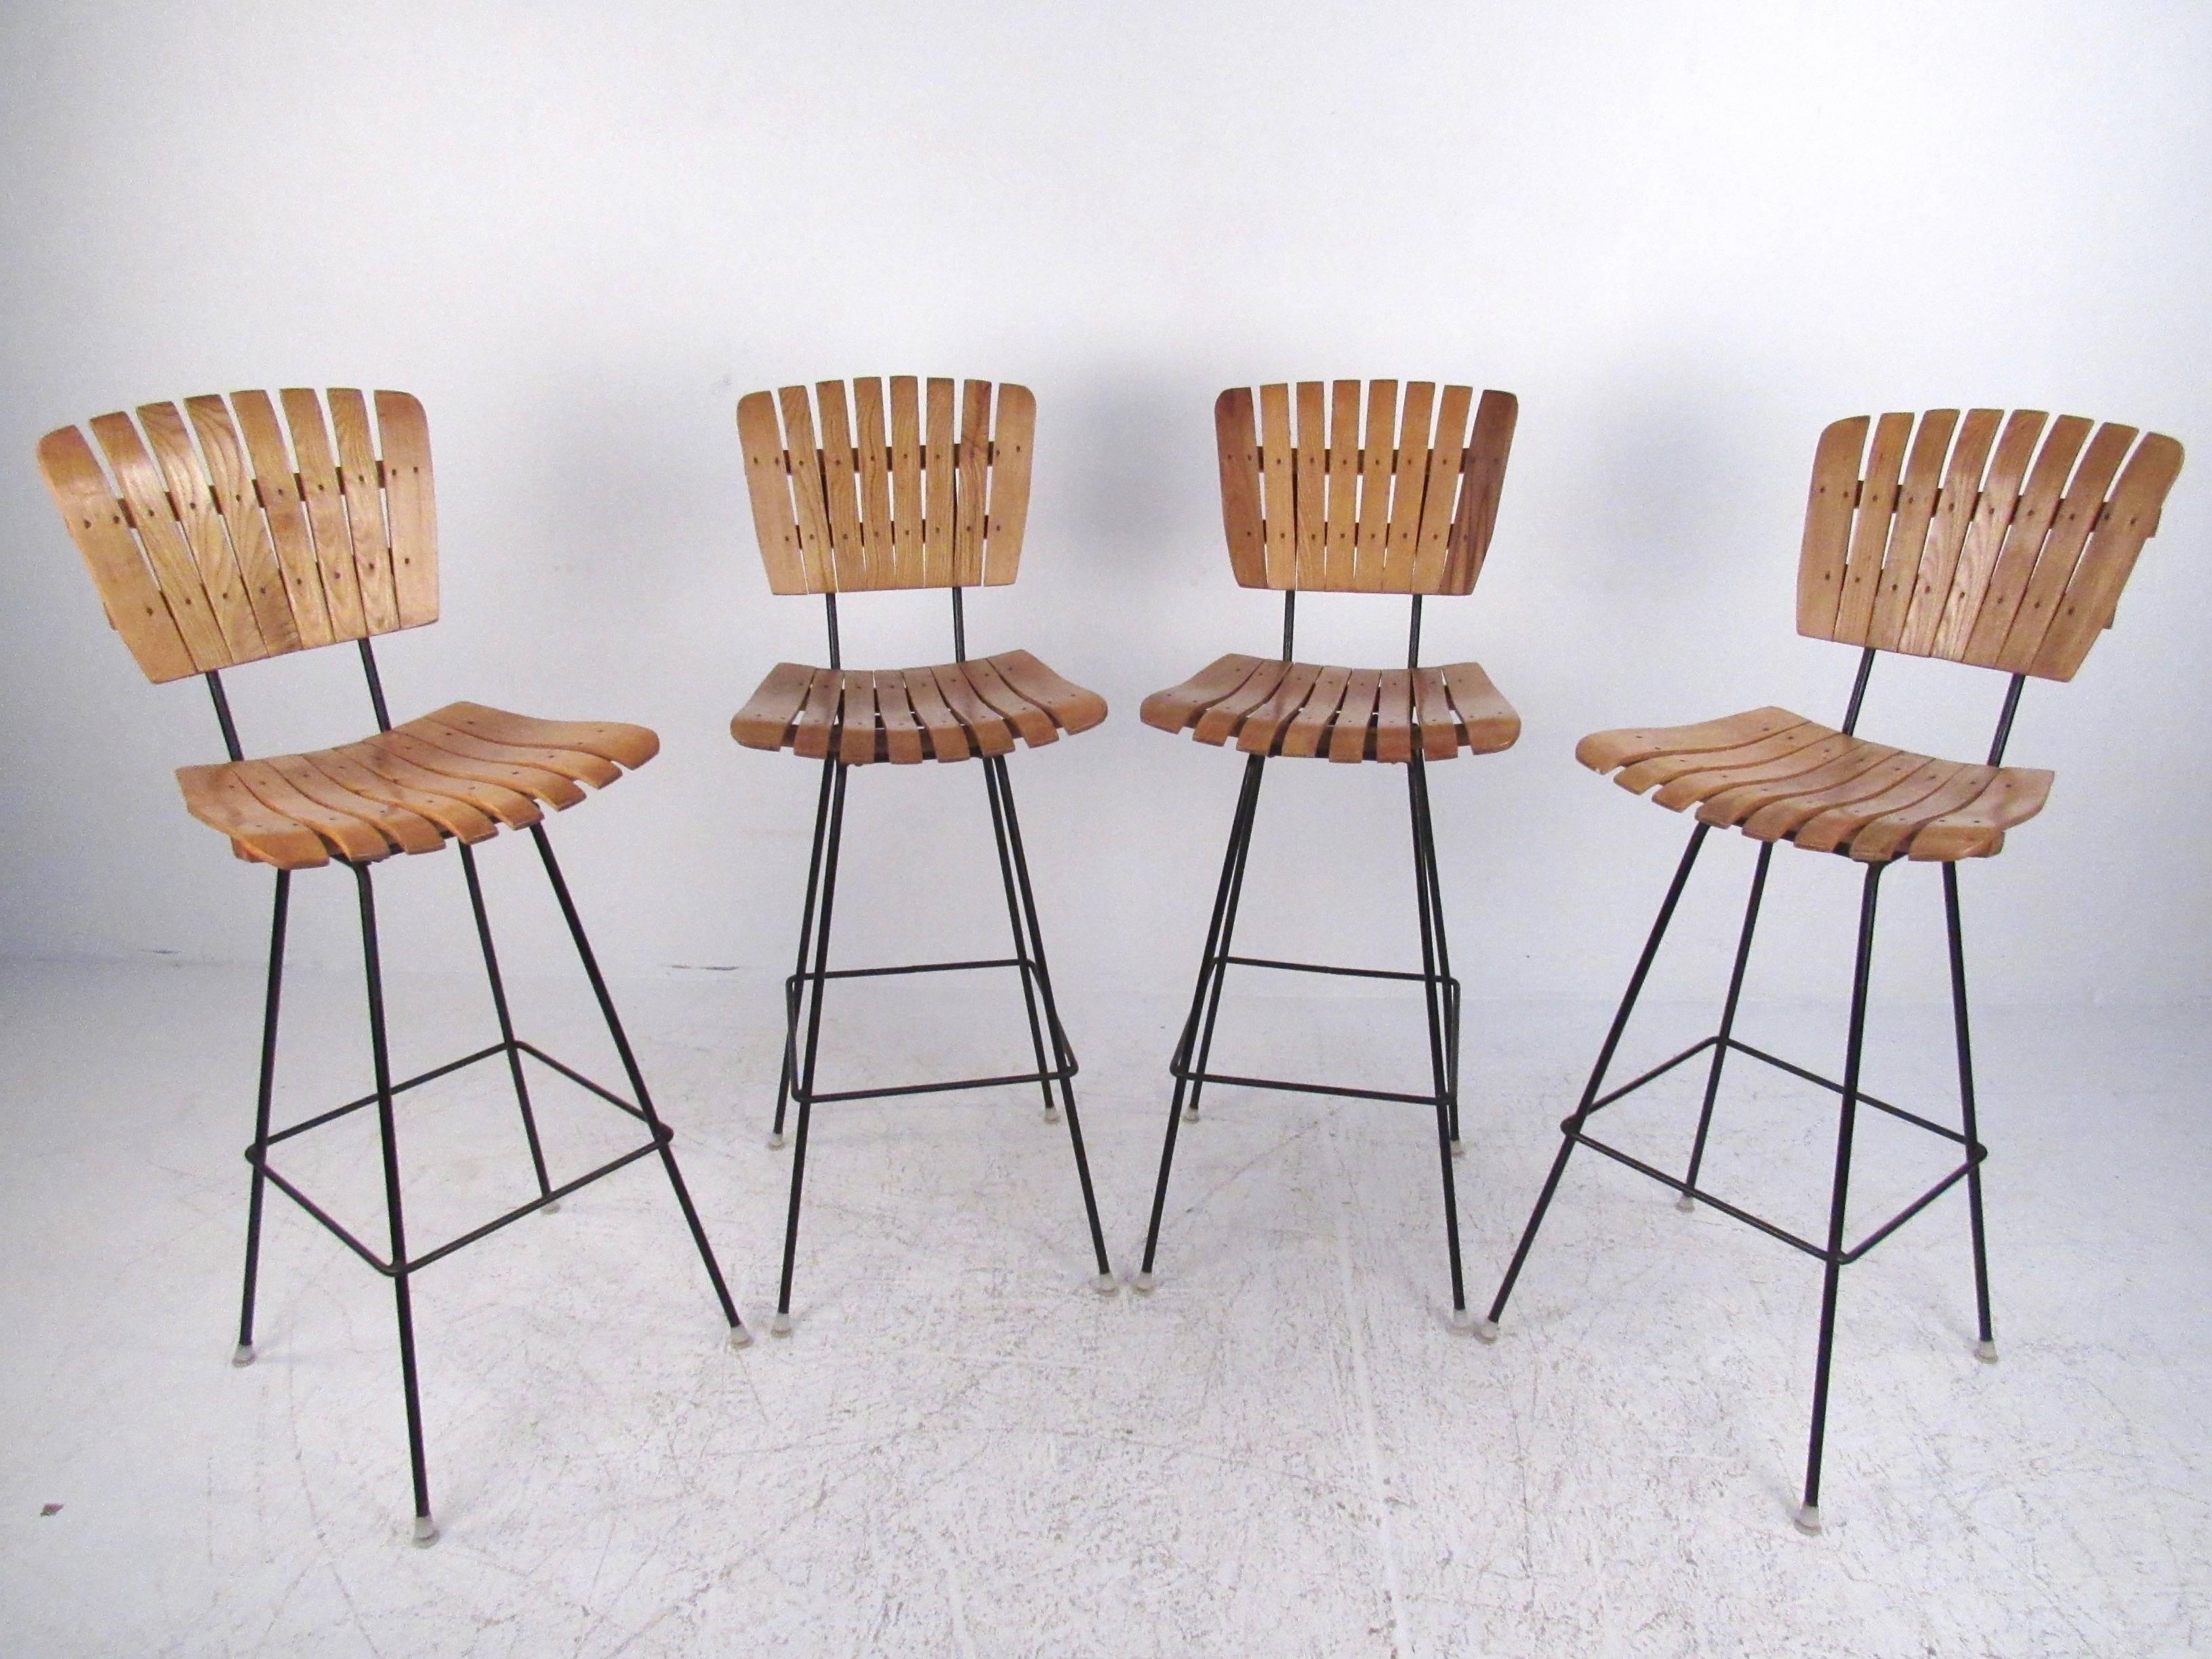 This set of four mid-century slat stools feature iron legs and unique oak slats. Shapely bar stools make a unique vintage addition to any bar or counter. Please confirm item location (NY or NJ).